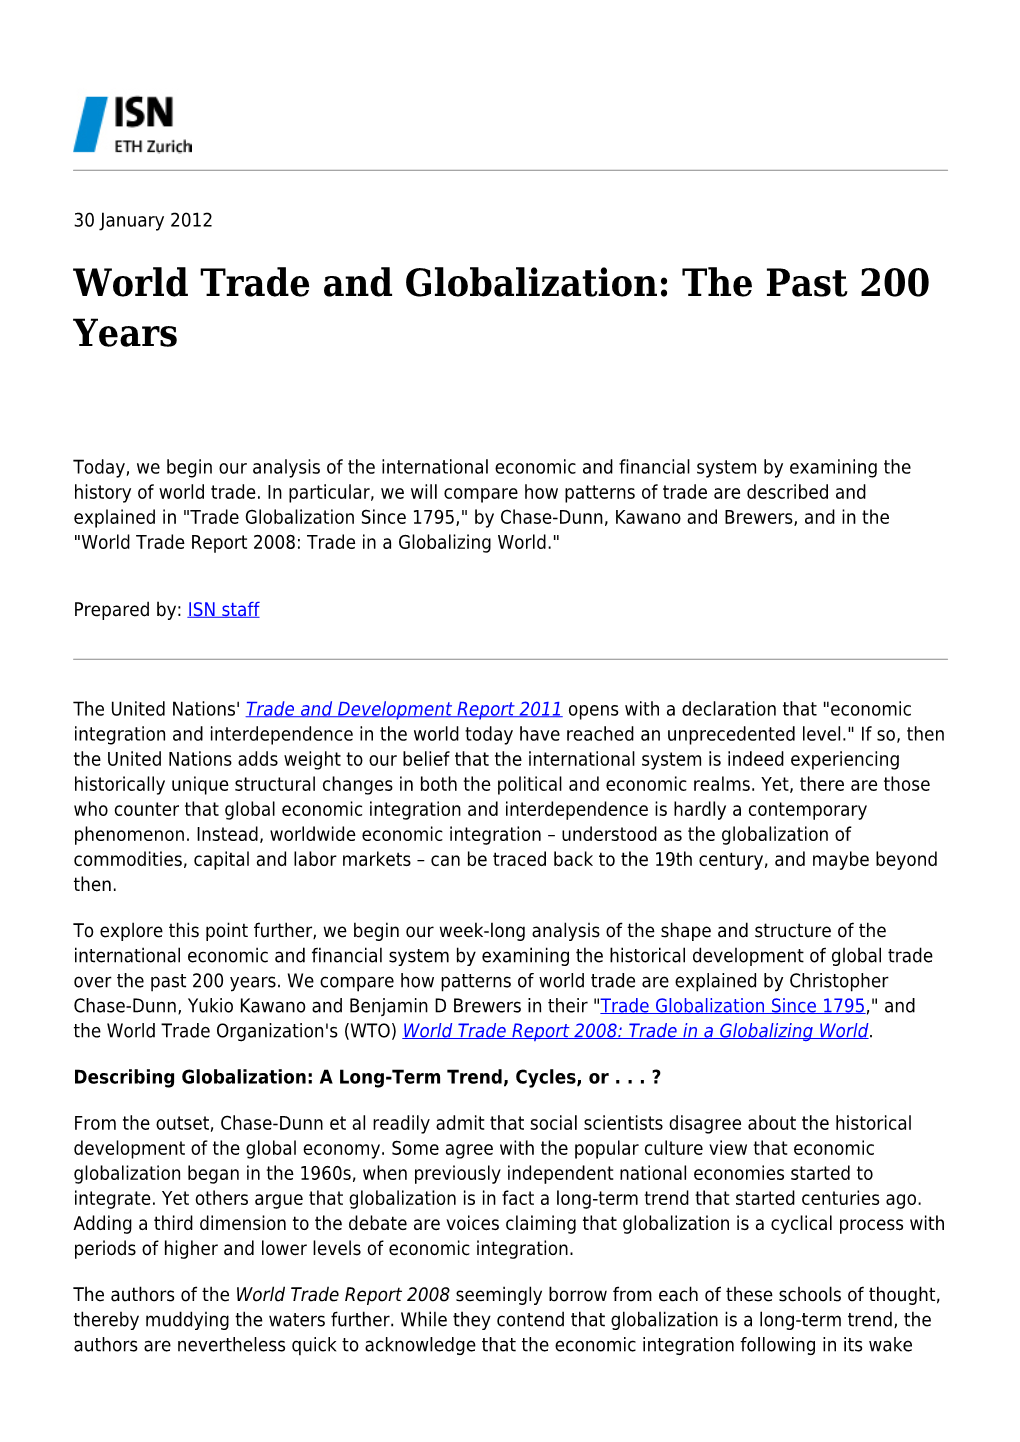 World Trade and Globalization: the Past 200 Years